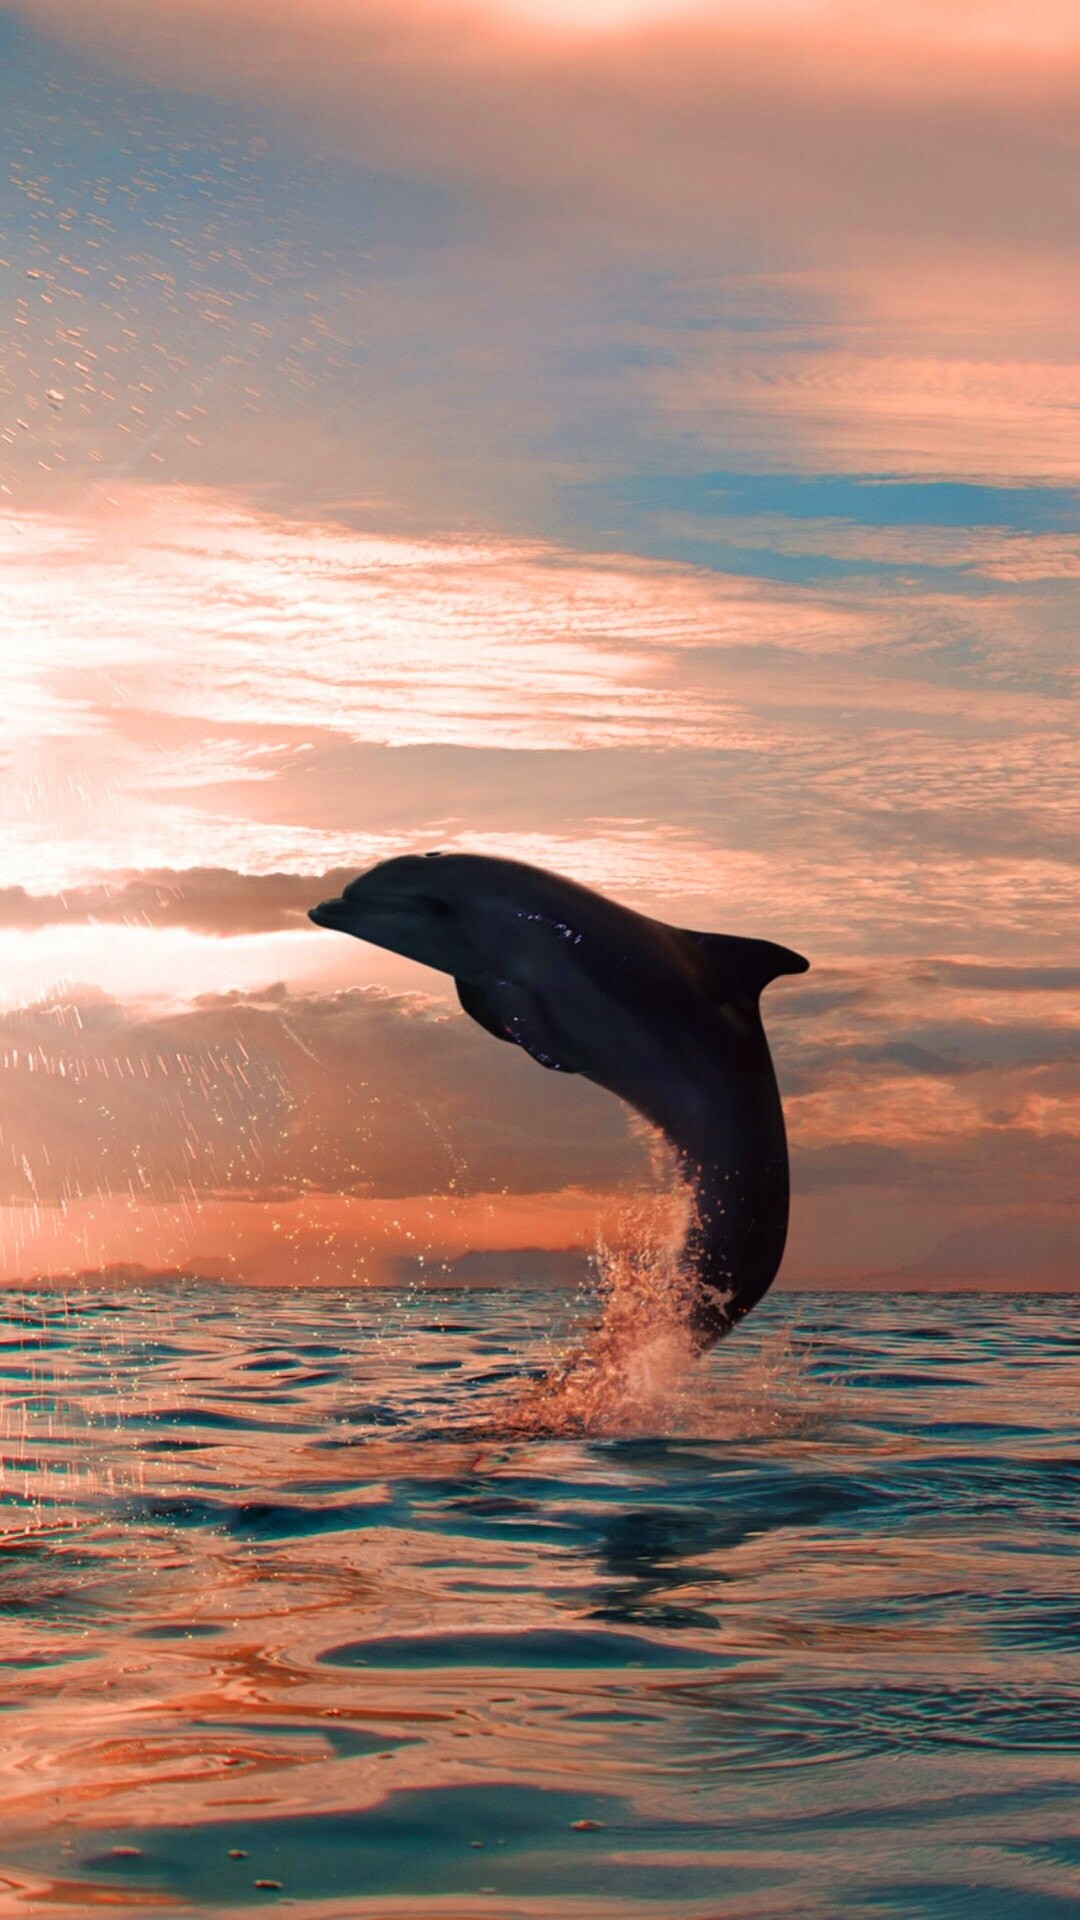 Dolphin: It has become the subject of scientific studies because of its intelligence and ability to communicate by using a range of sounds and ultrasonic pulses, Aquatic mammal. 1080x1920 Full HD Wallpaper.